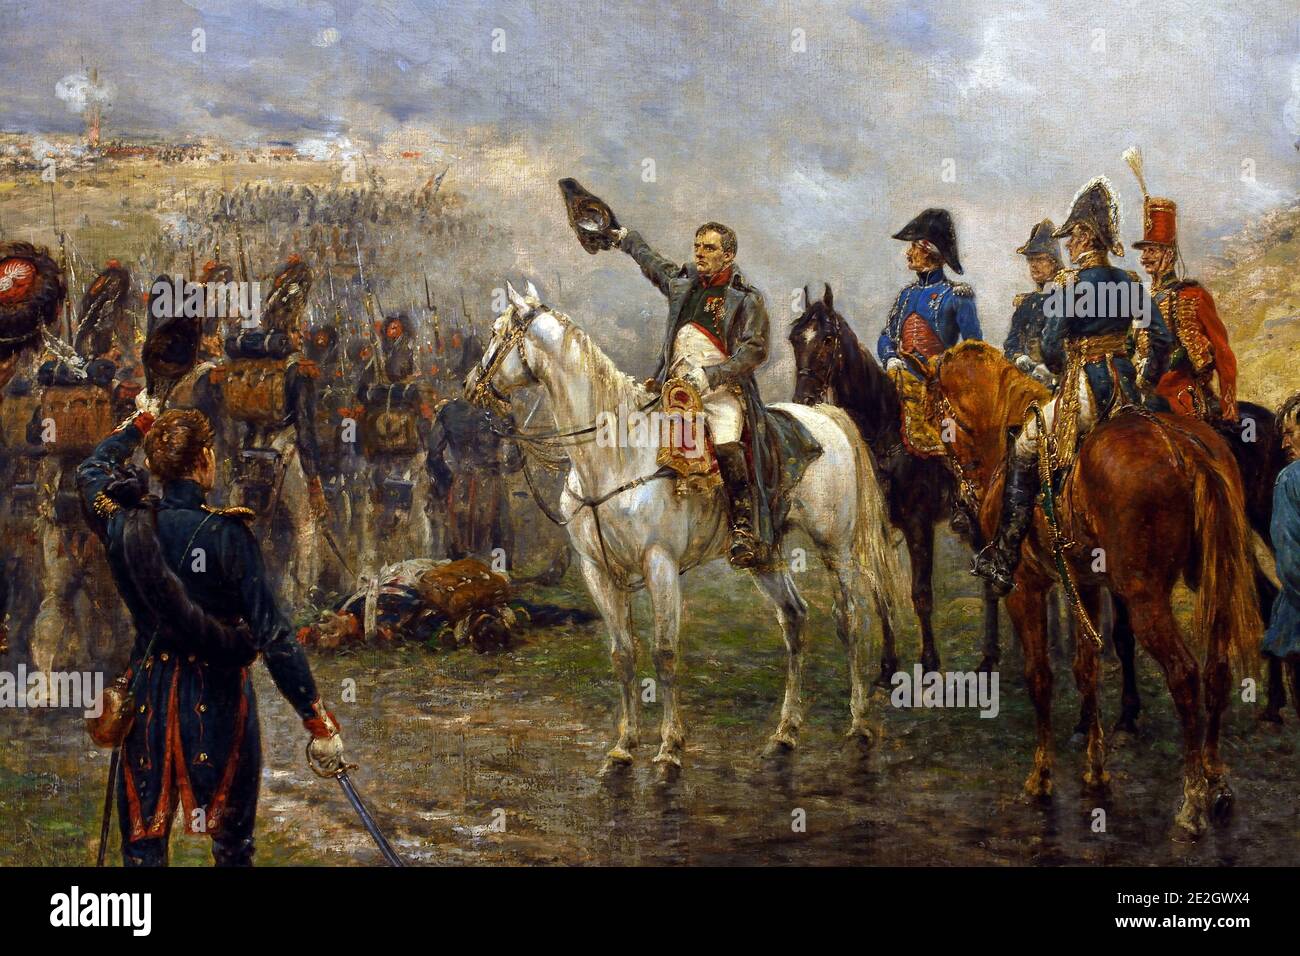 The Last Attack, Waterloo 1895 Ernest Crofts 1847-1911 ( Napoleon's last grand attack at Waterloo: Napoleon addresses the Old Guard as it prepares to attack the Anglo-Allied center at Waterloo.  ) France, French, England, Napoleon, Bonaparte, 1799 to 1814,  Emperor, French, France, King of Italy as Napoleon I, Francis I was King of France from 1515 until his death in 1547 French Stock Photo